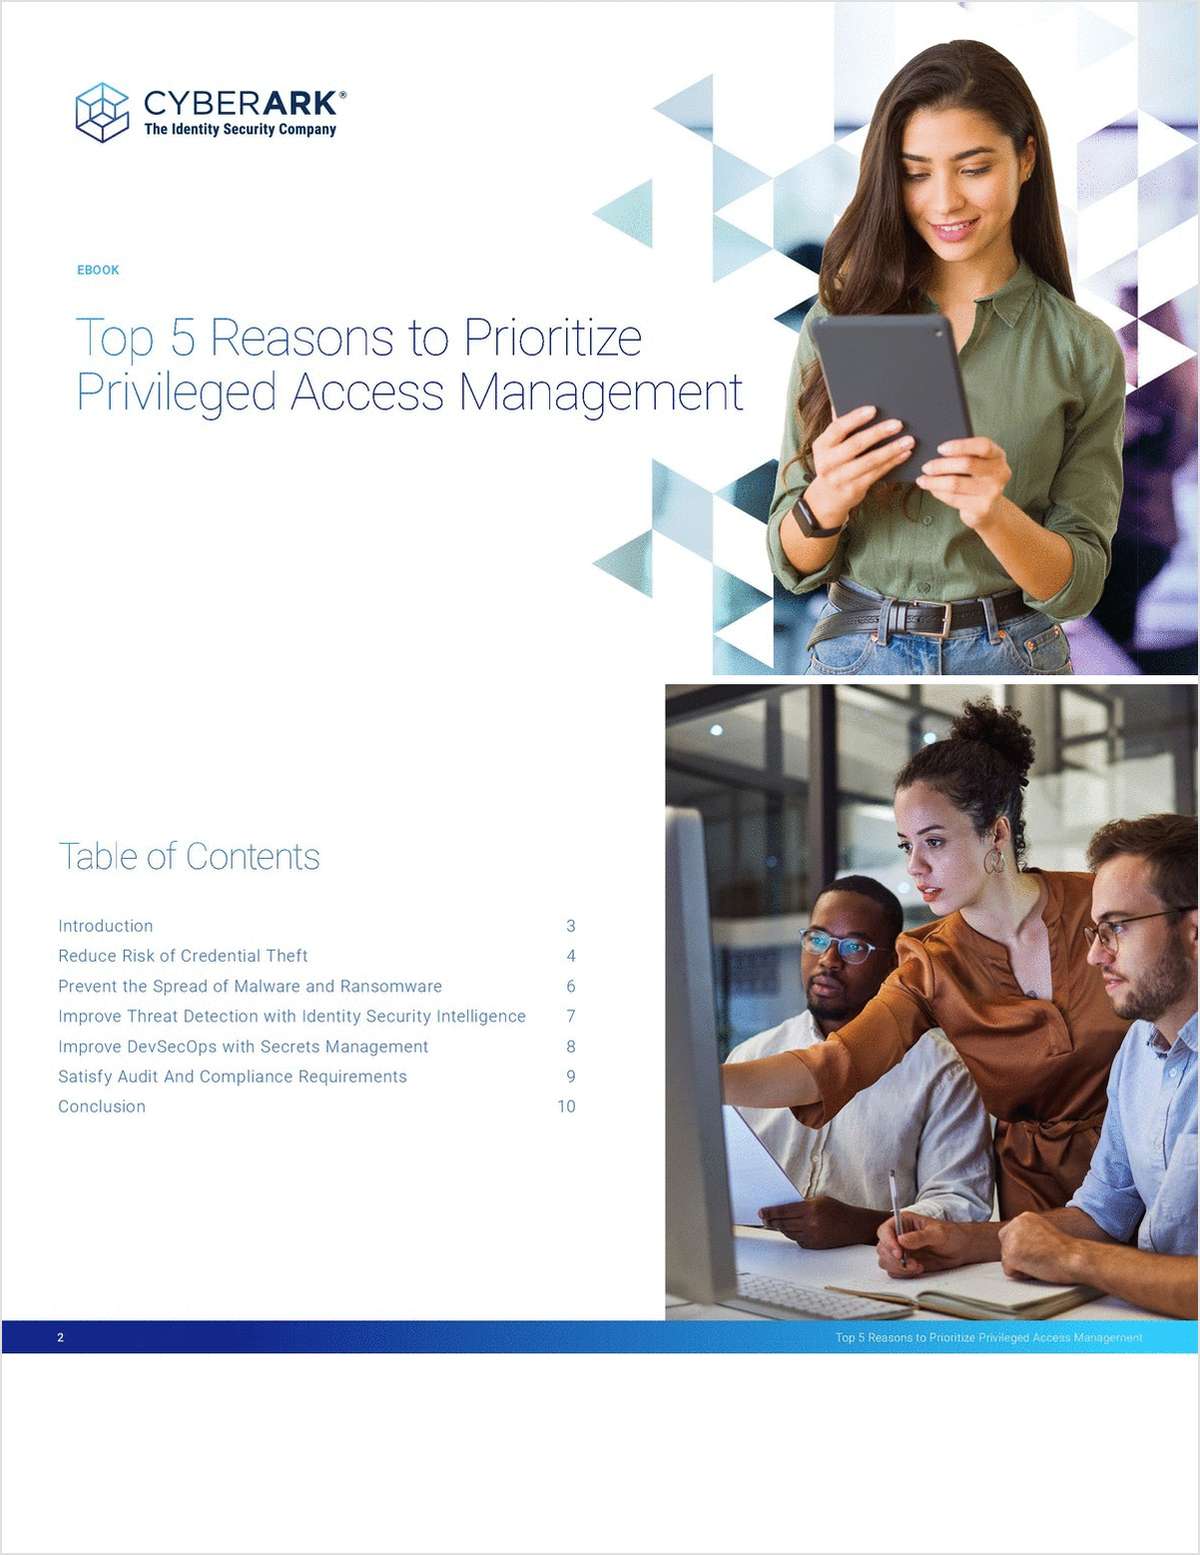 Top 5 Reasons to Prioritize Privileged Access Management